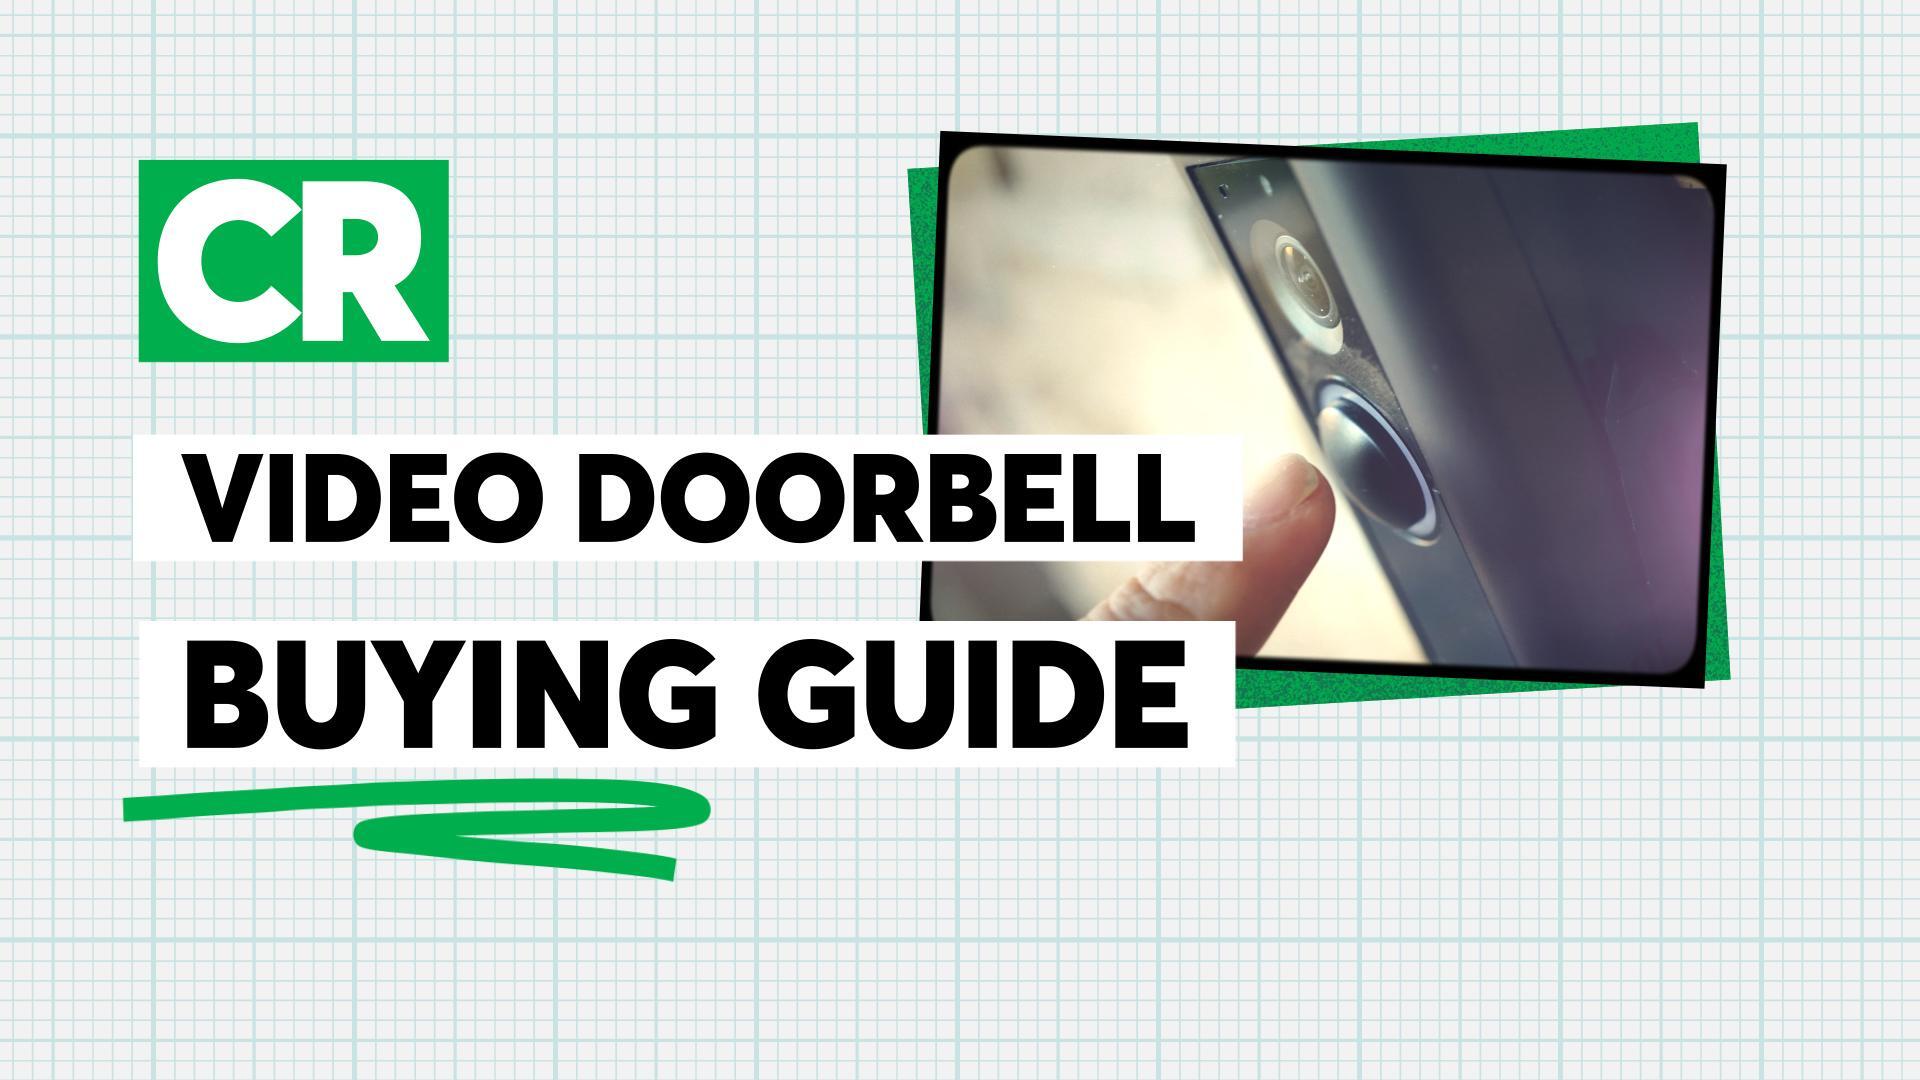 Your video doorbell does more than watch your front yard - 3 secret tips